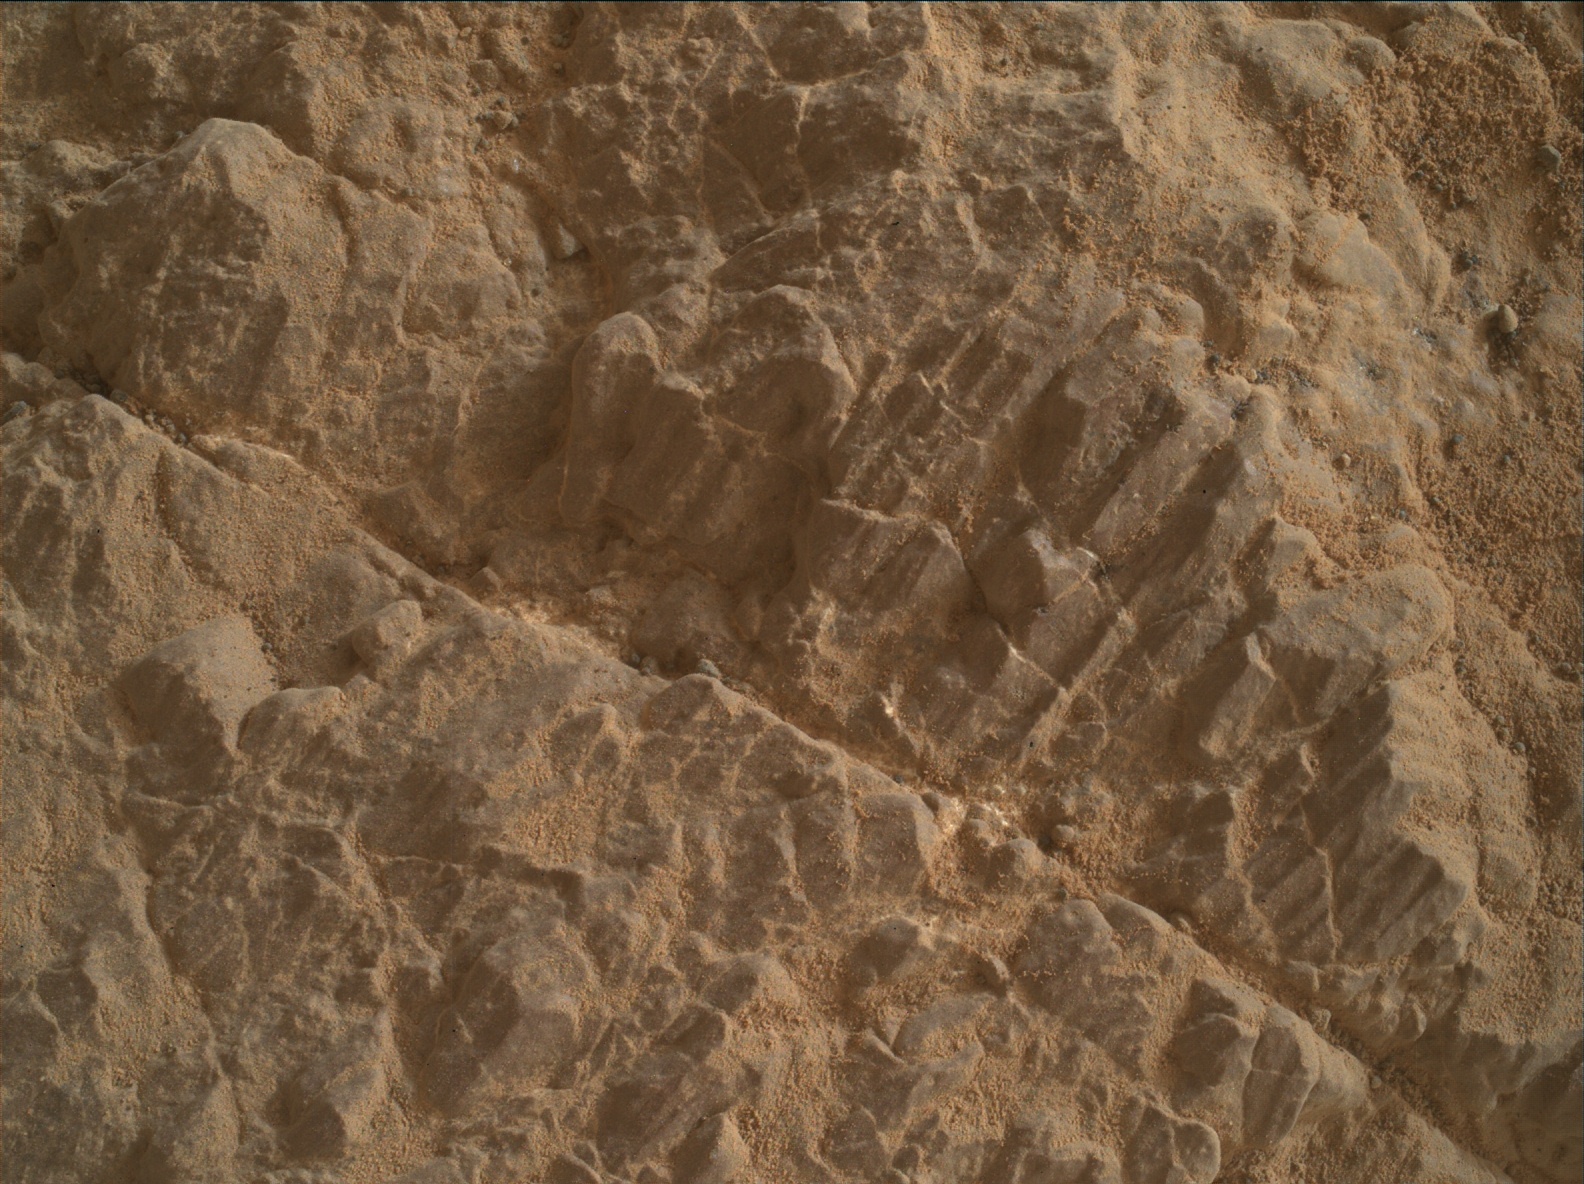 Nasa's Mars rover Curiosity acquired this image using its Mars Hand Lens Imager (MAHLI) on Sol 2319